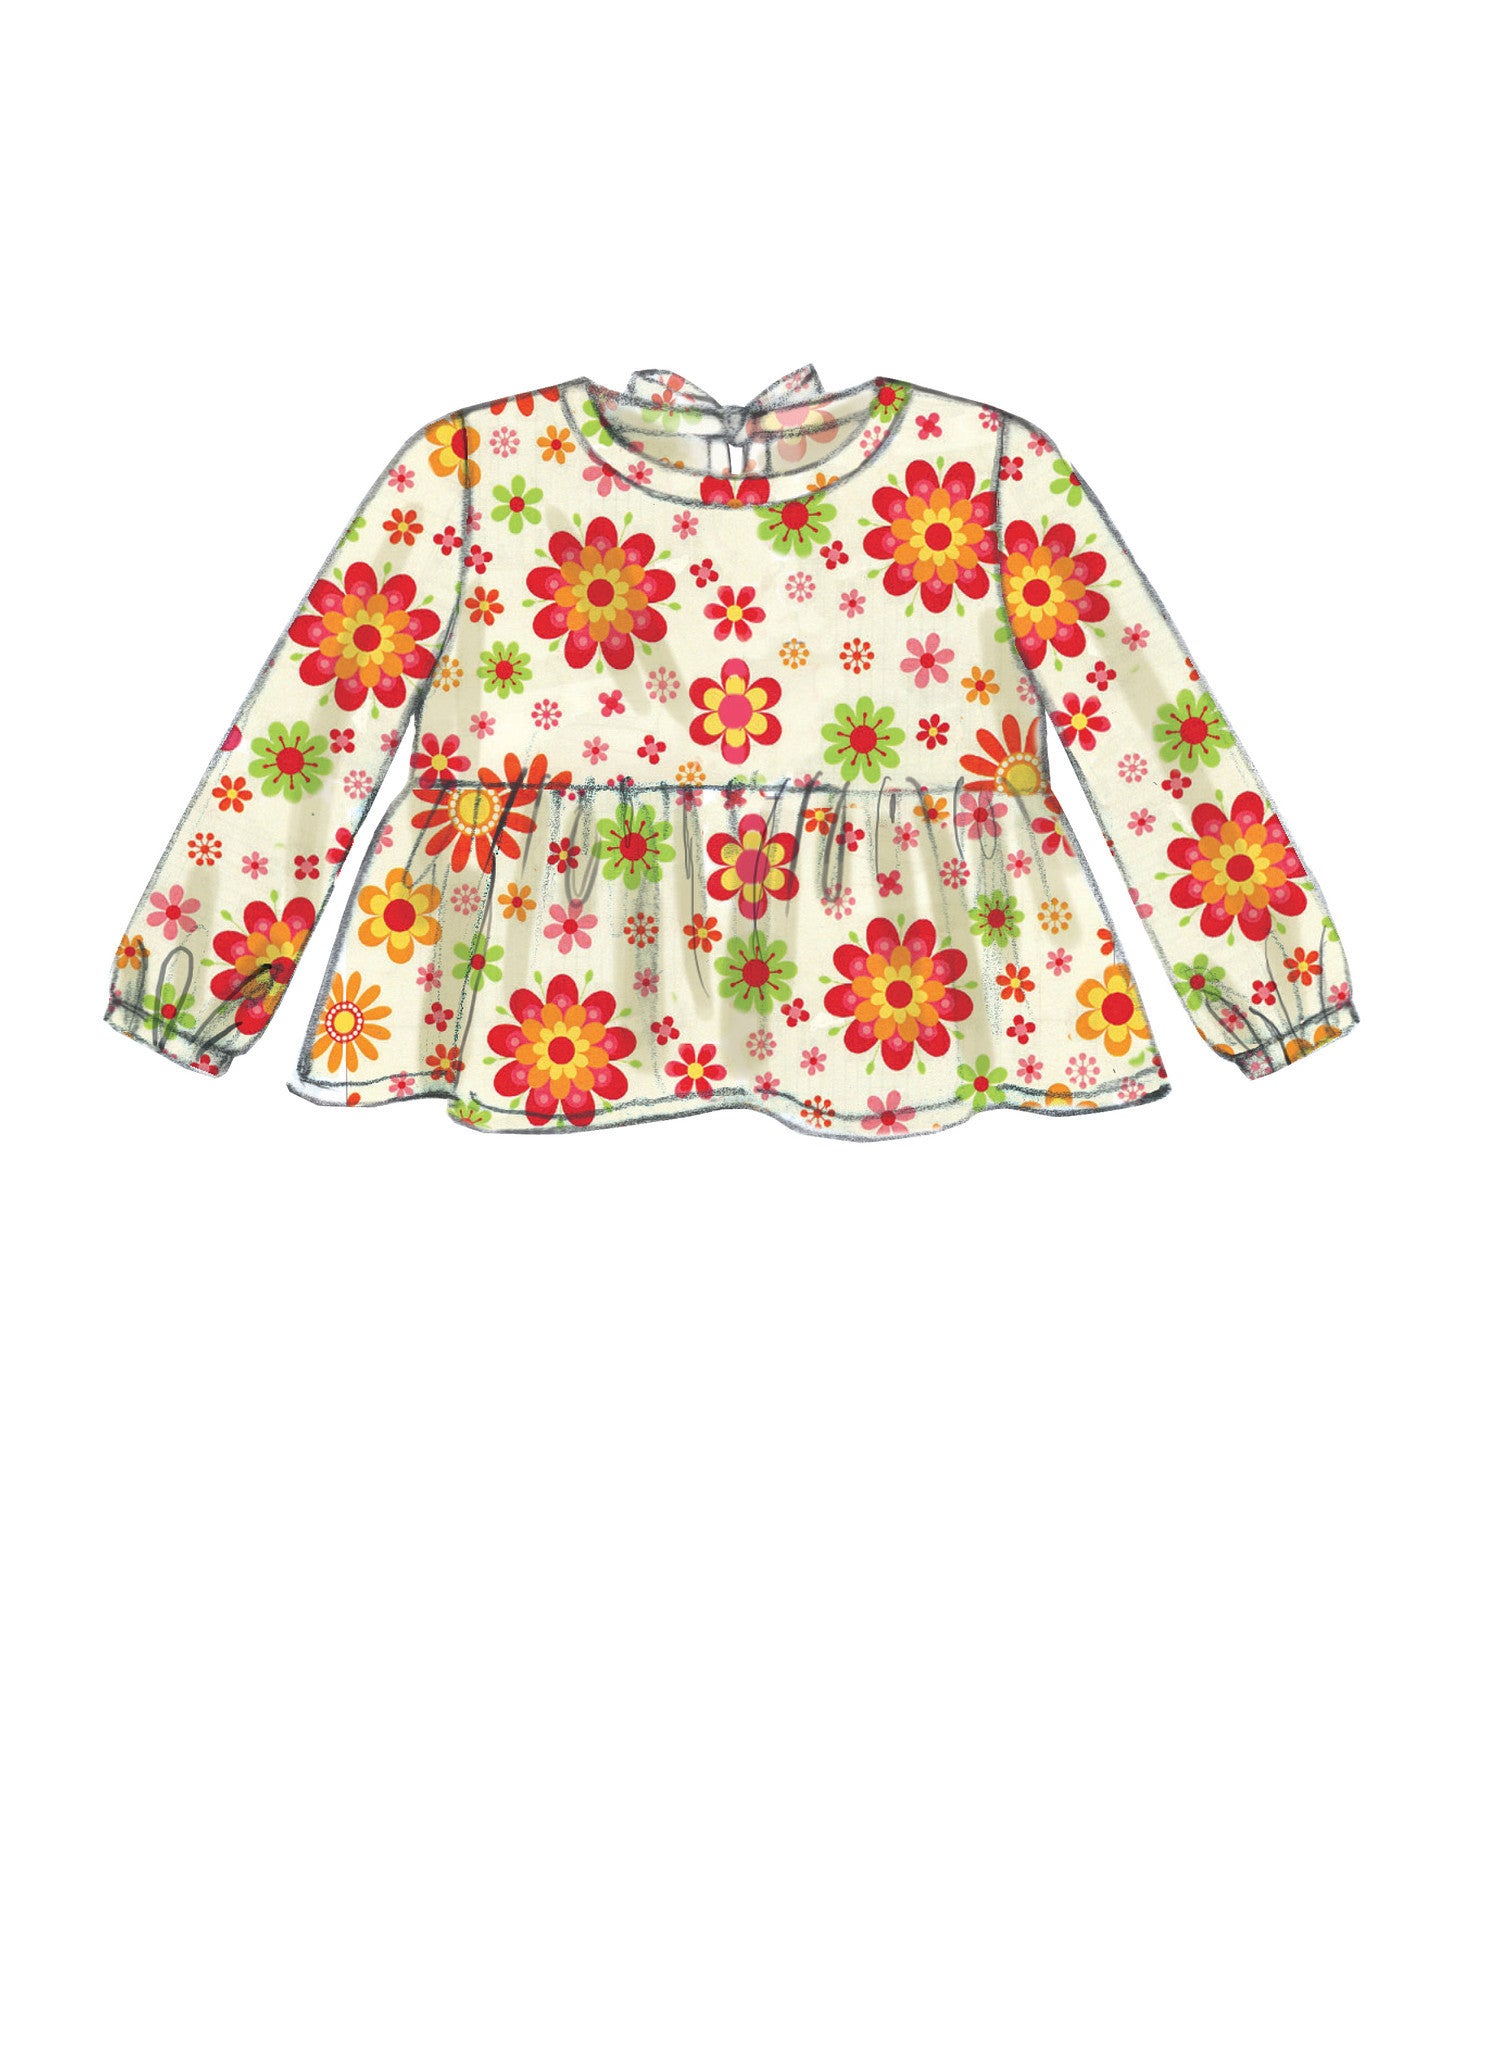 M7458 Toddlers' Gathered Tops, Dresses and Leggings from Jaycotts Sewing Supplies